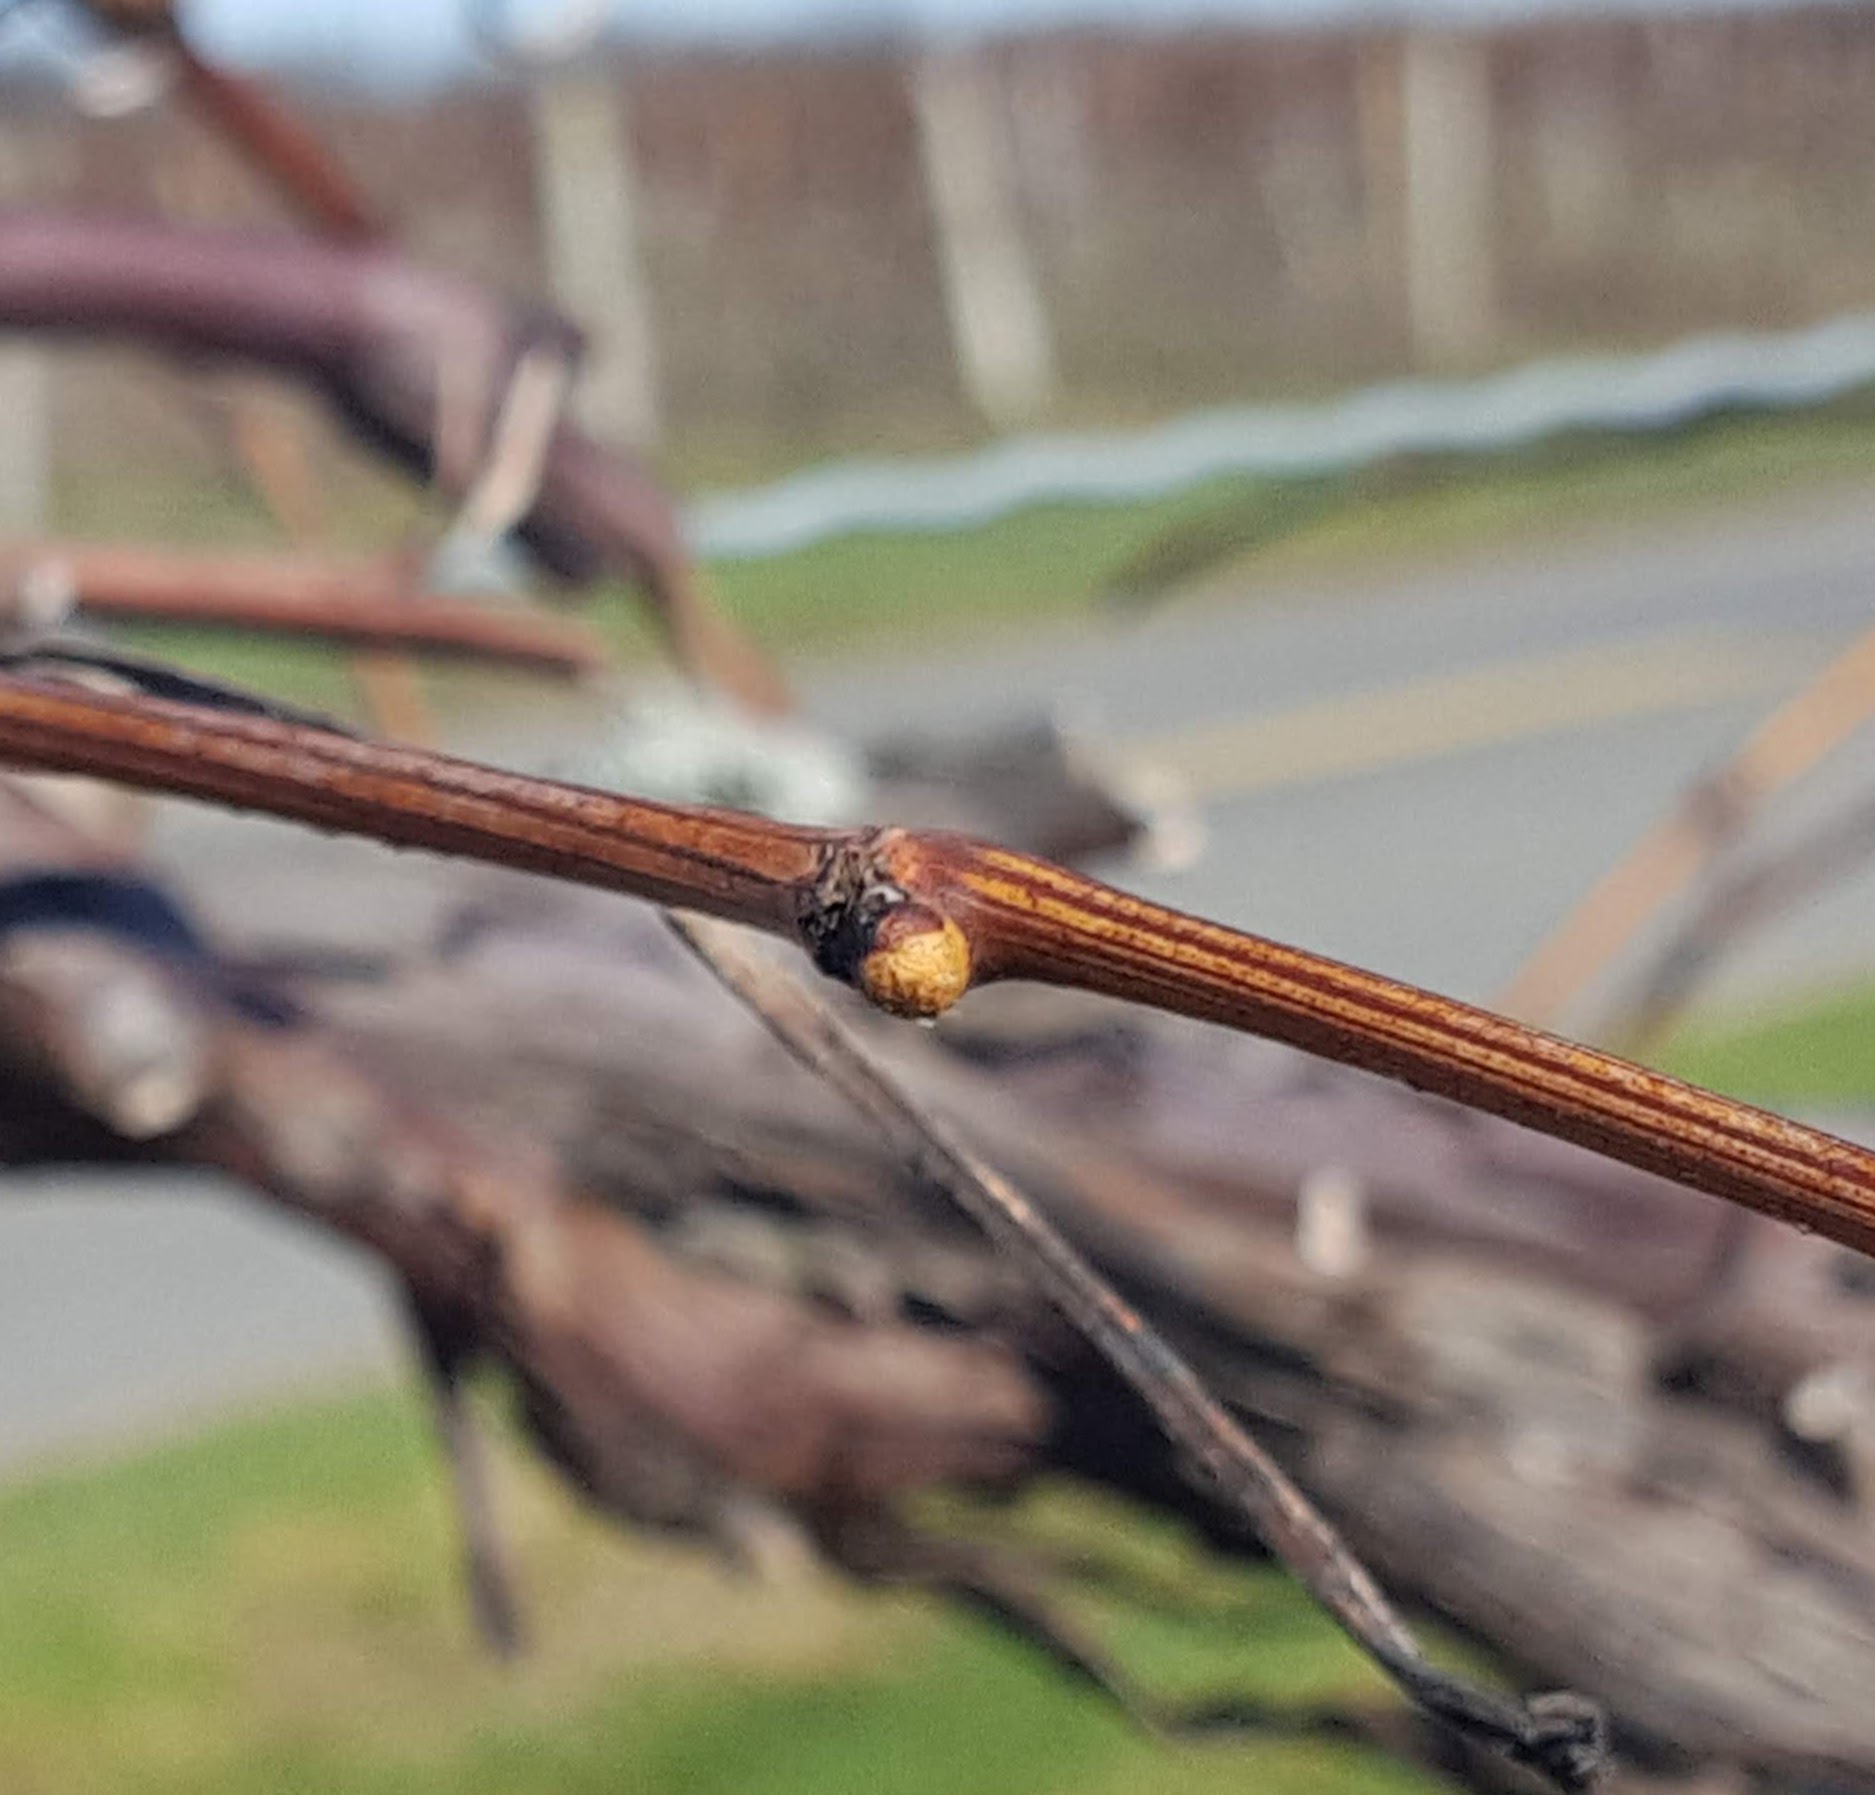 Concord grape buds have started to swell